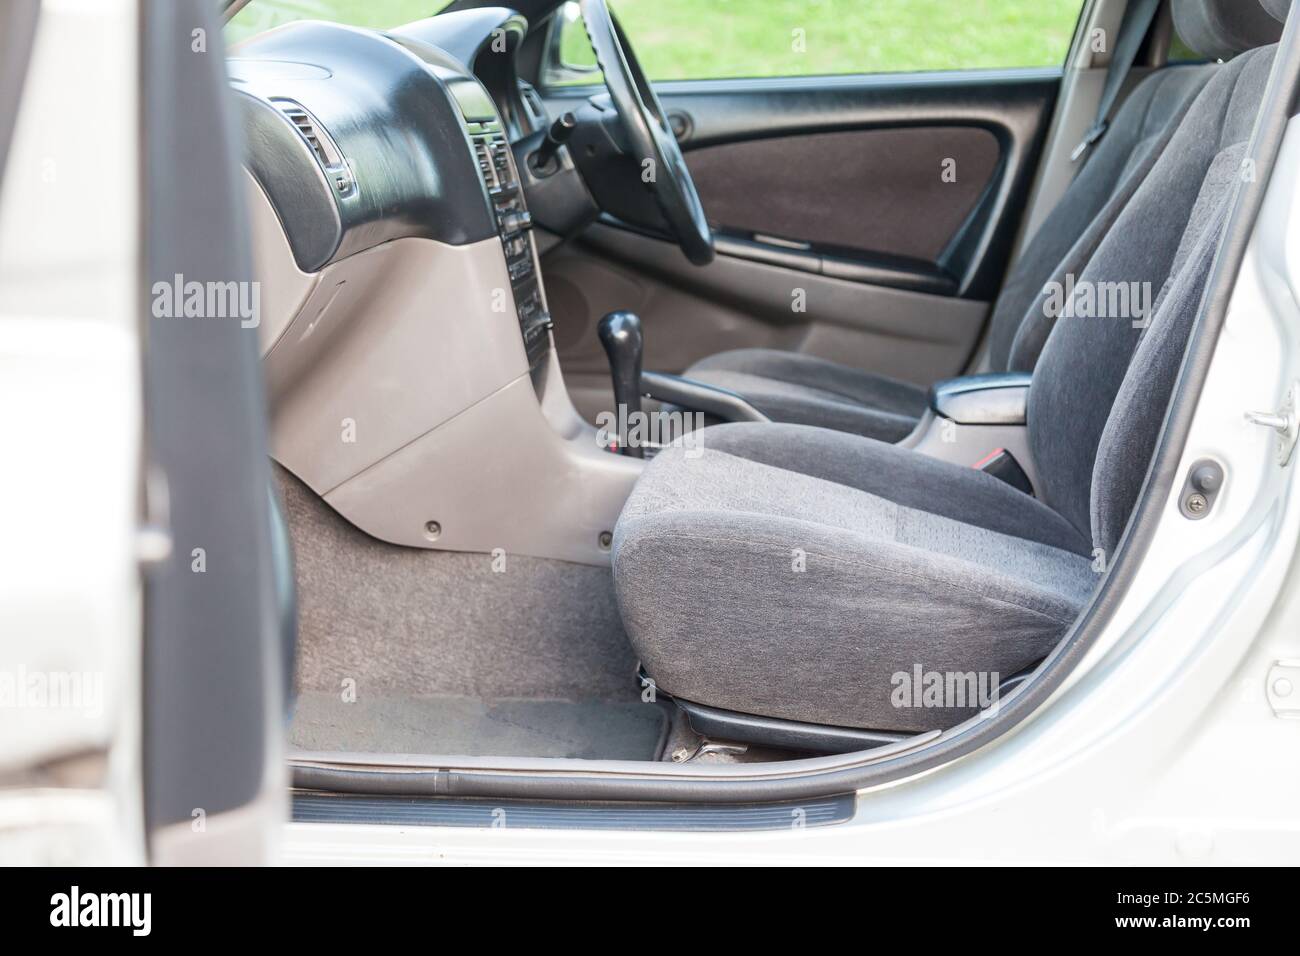 An open front passenger door of a gray sedan with seats covered in beige fabric and with a black plastic control panel, a clean interior after dry cle Stock Photo